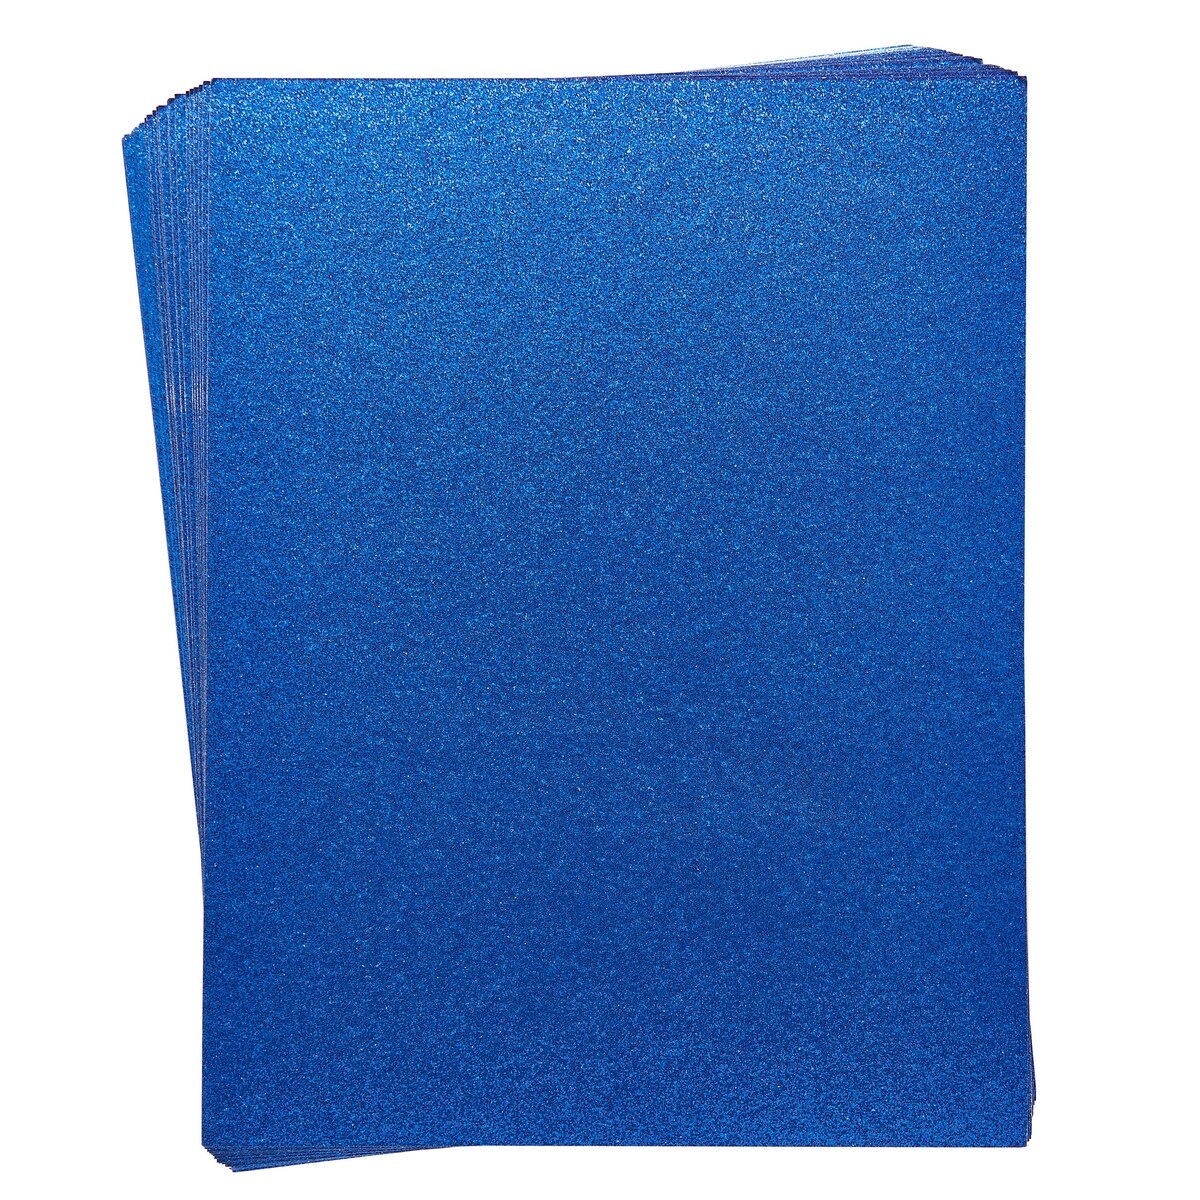 Royal Marble Perforated 8.5 x 11 80 Marble Cardstock 250 Sheets/Pkg. Blue, Multipurpose Copy Paper